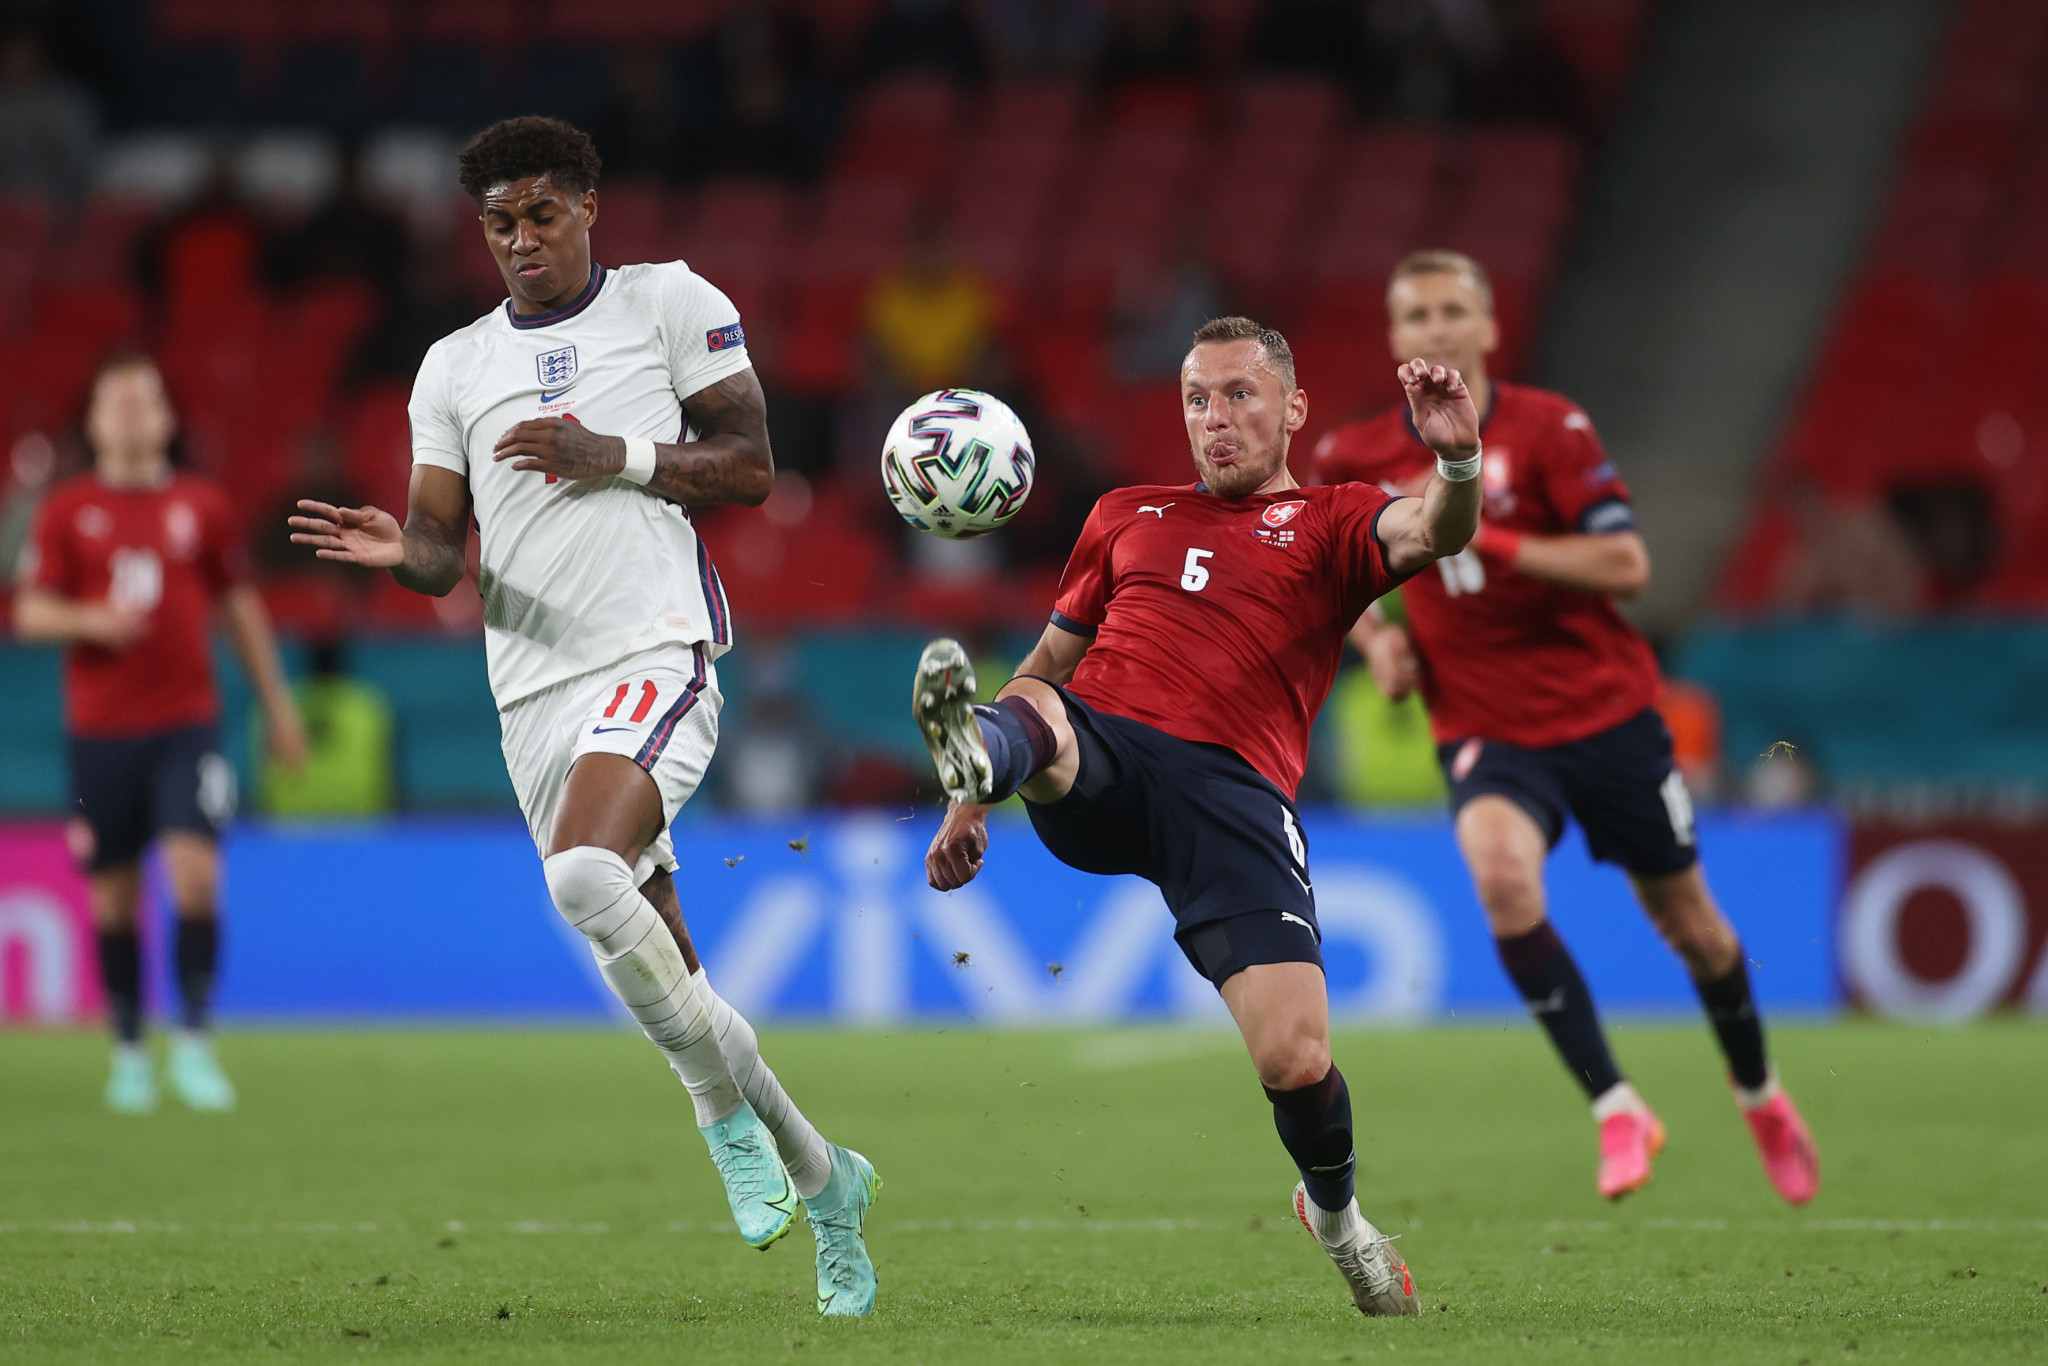 England, playing in white, topped Group D of UEFA Euro 2020 after a 1-0 win over the Czech Republic ©Getty Images